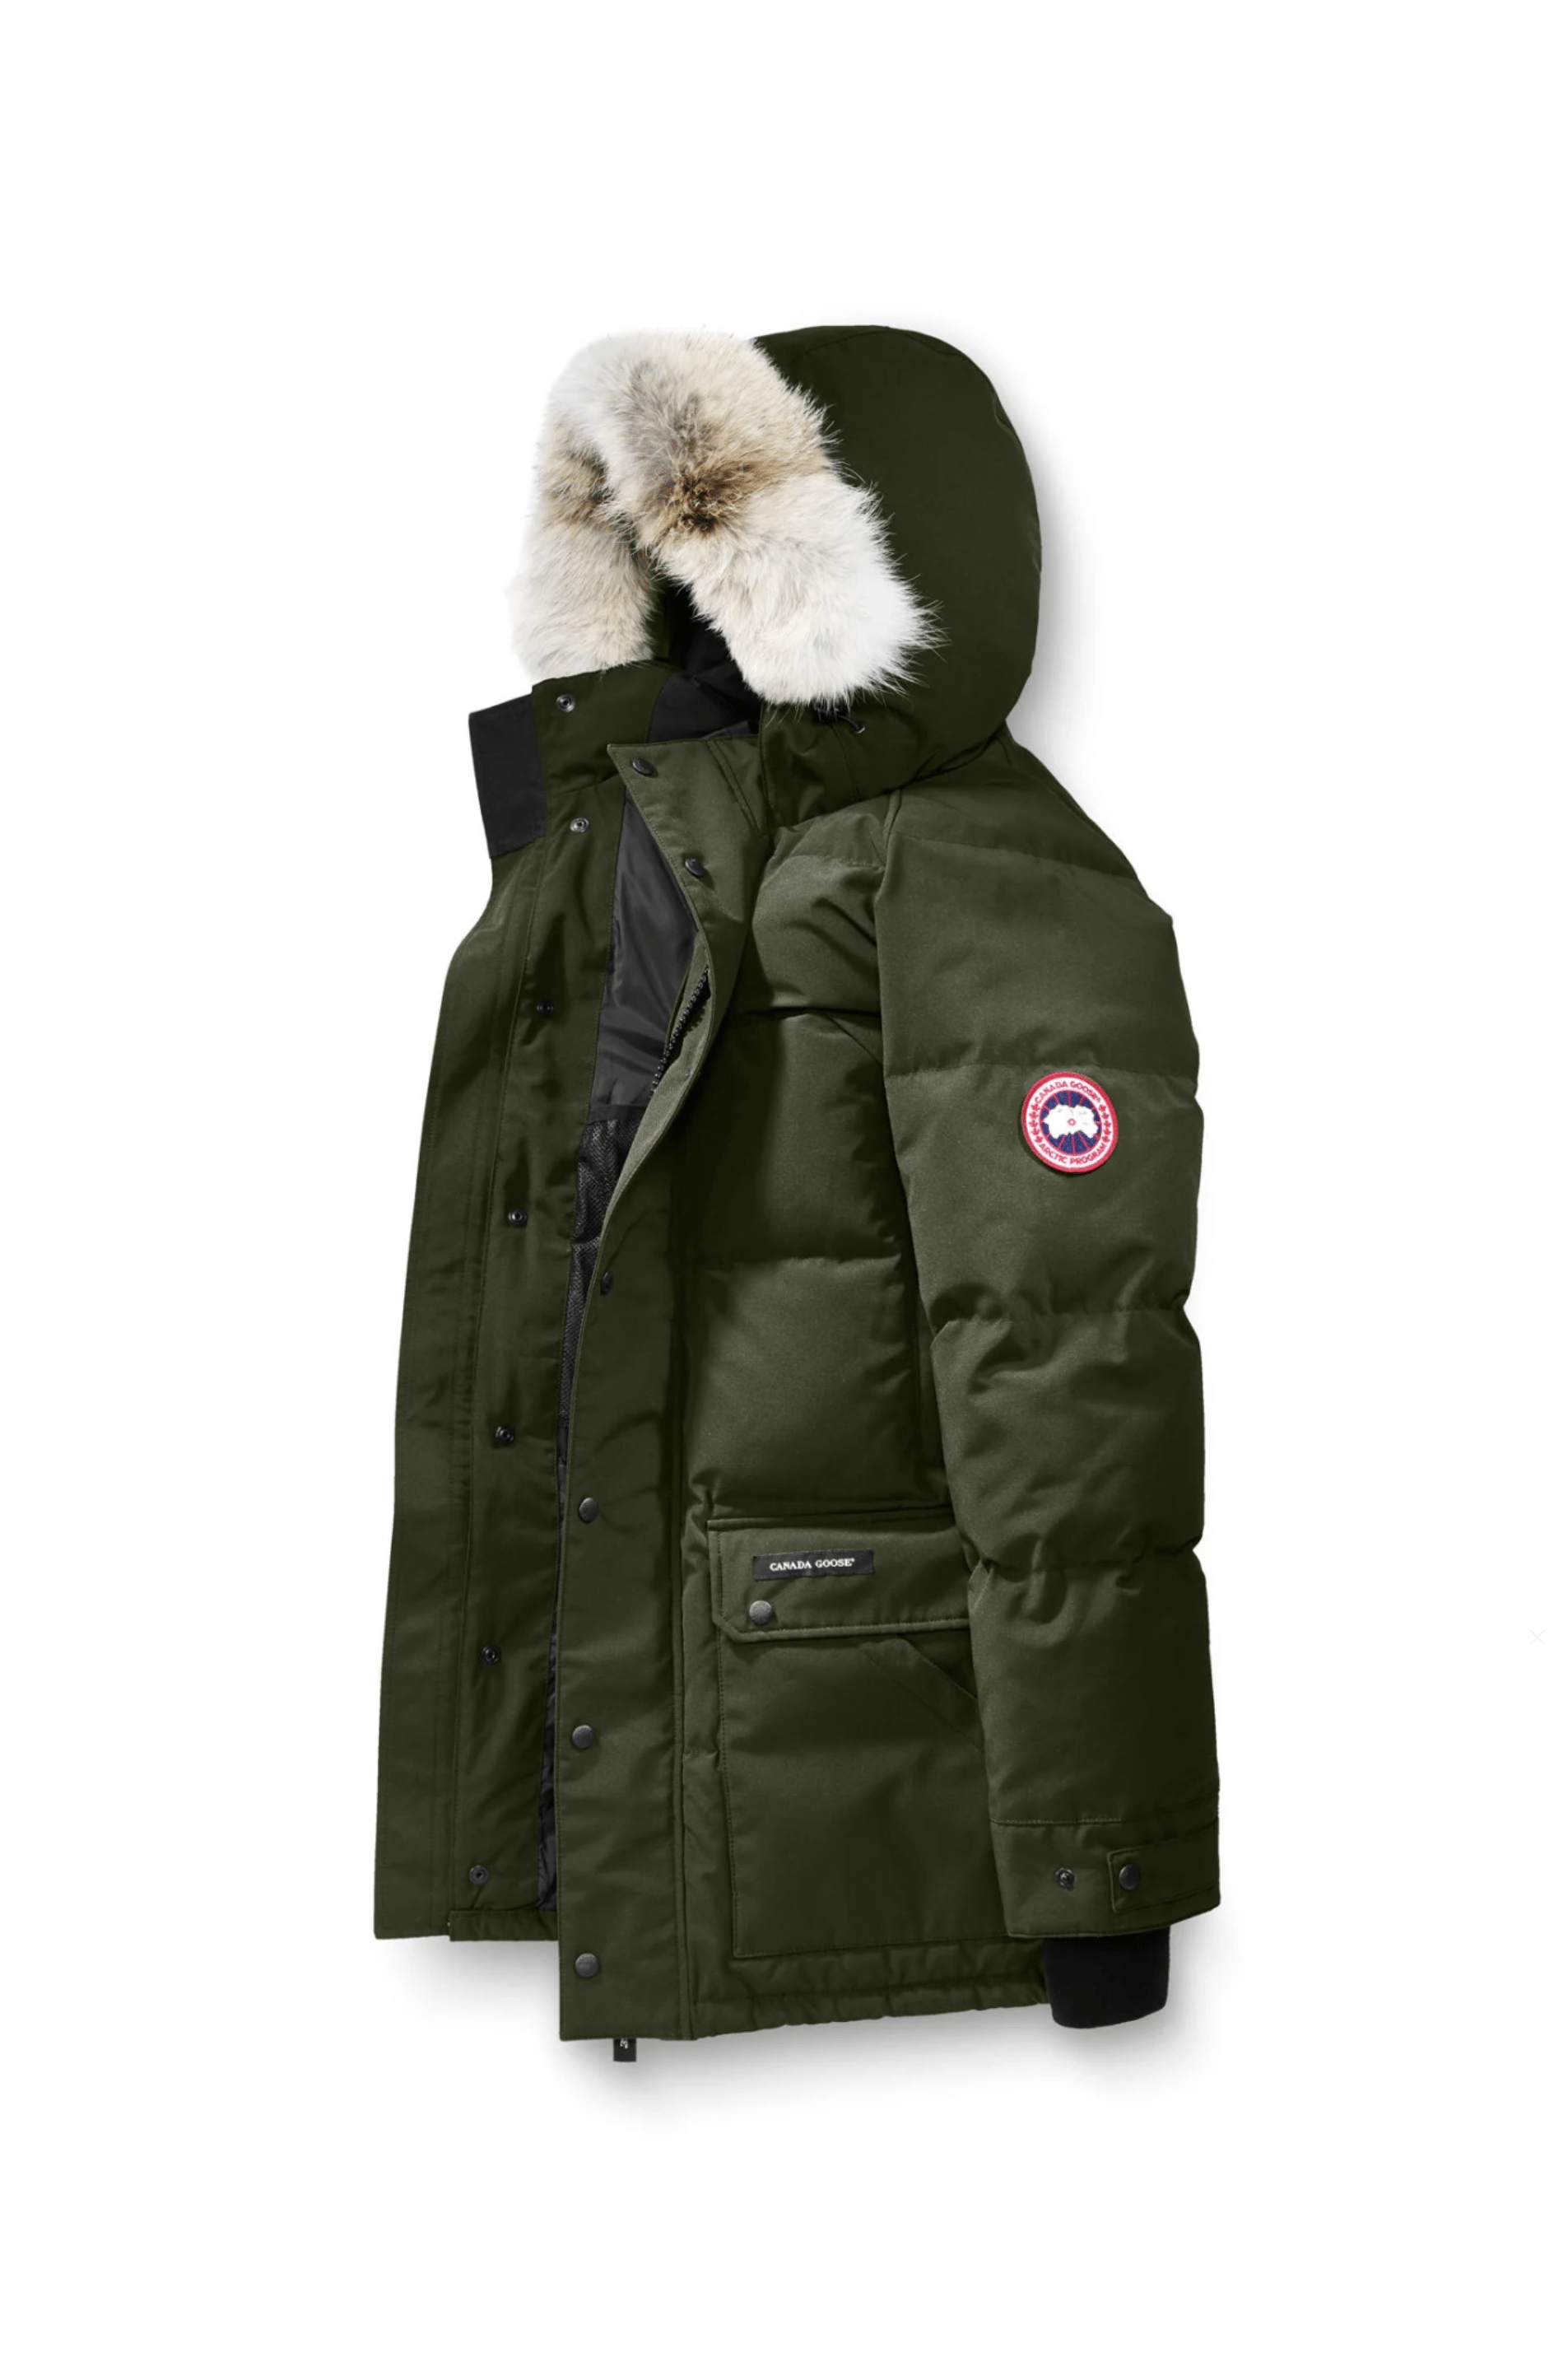 Canada Goose Jackets – Is It Worth It?